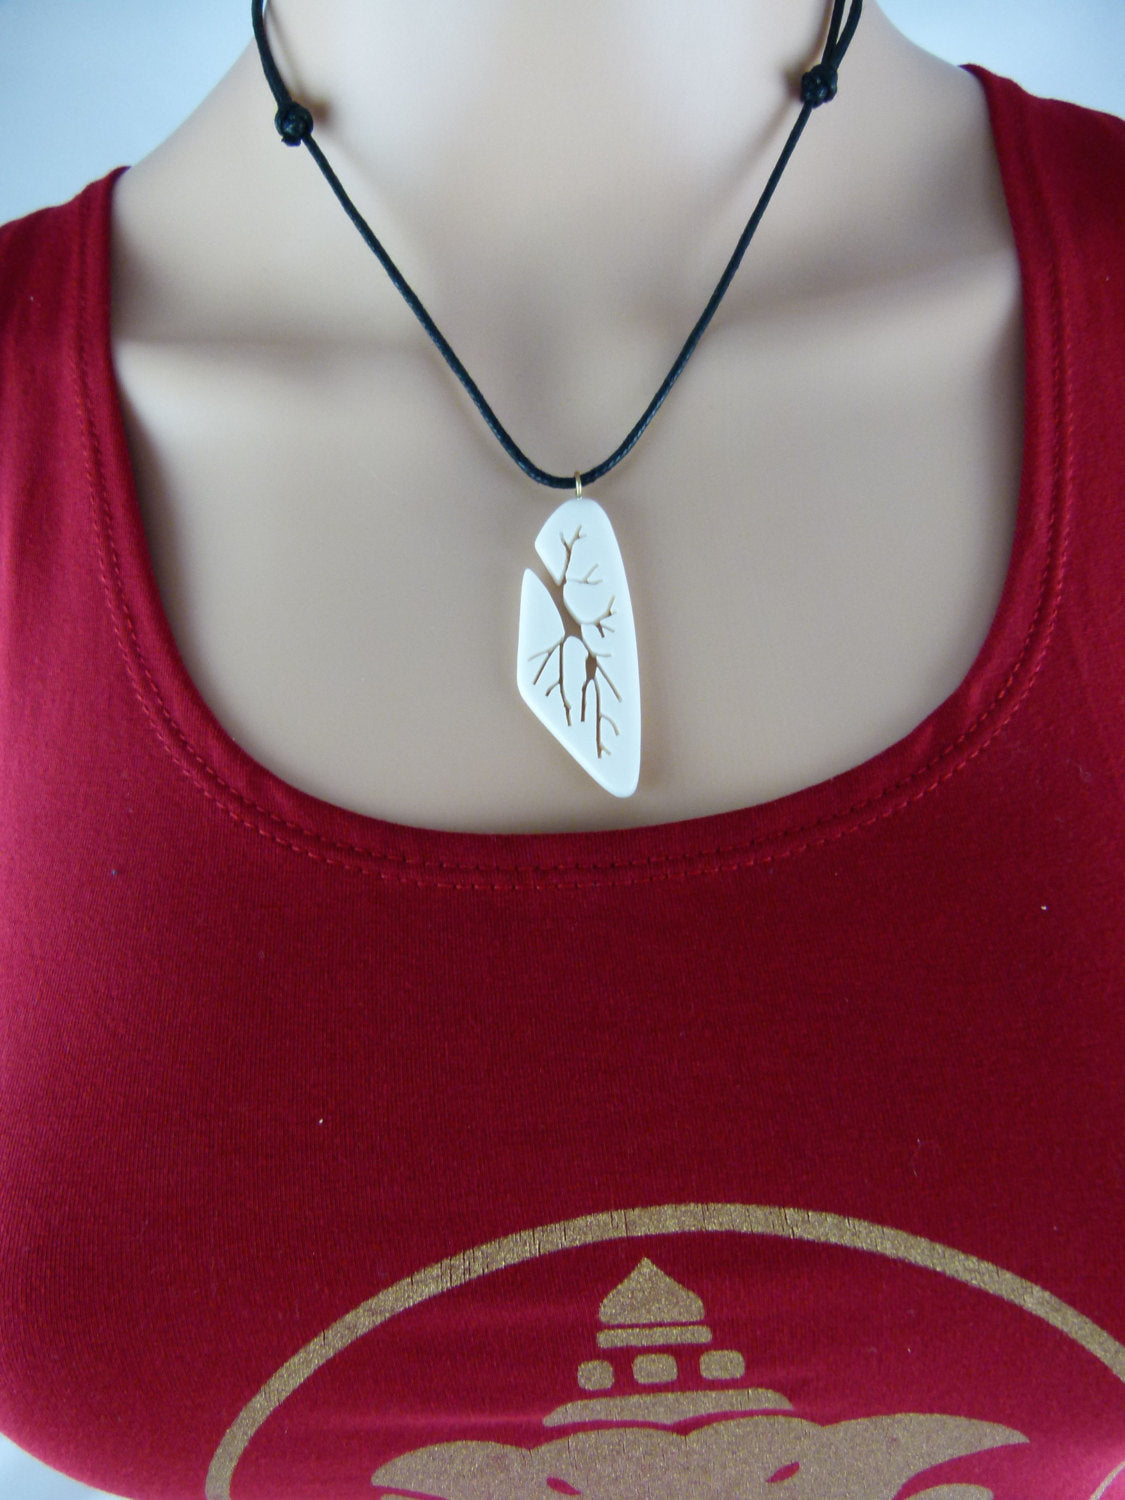 Grounded Roots Necklace - Hand Carved Bone Necklace - X001